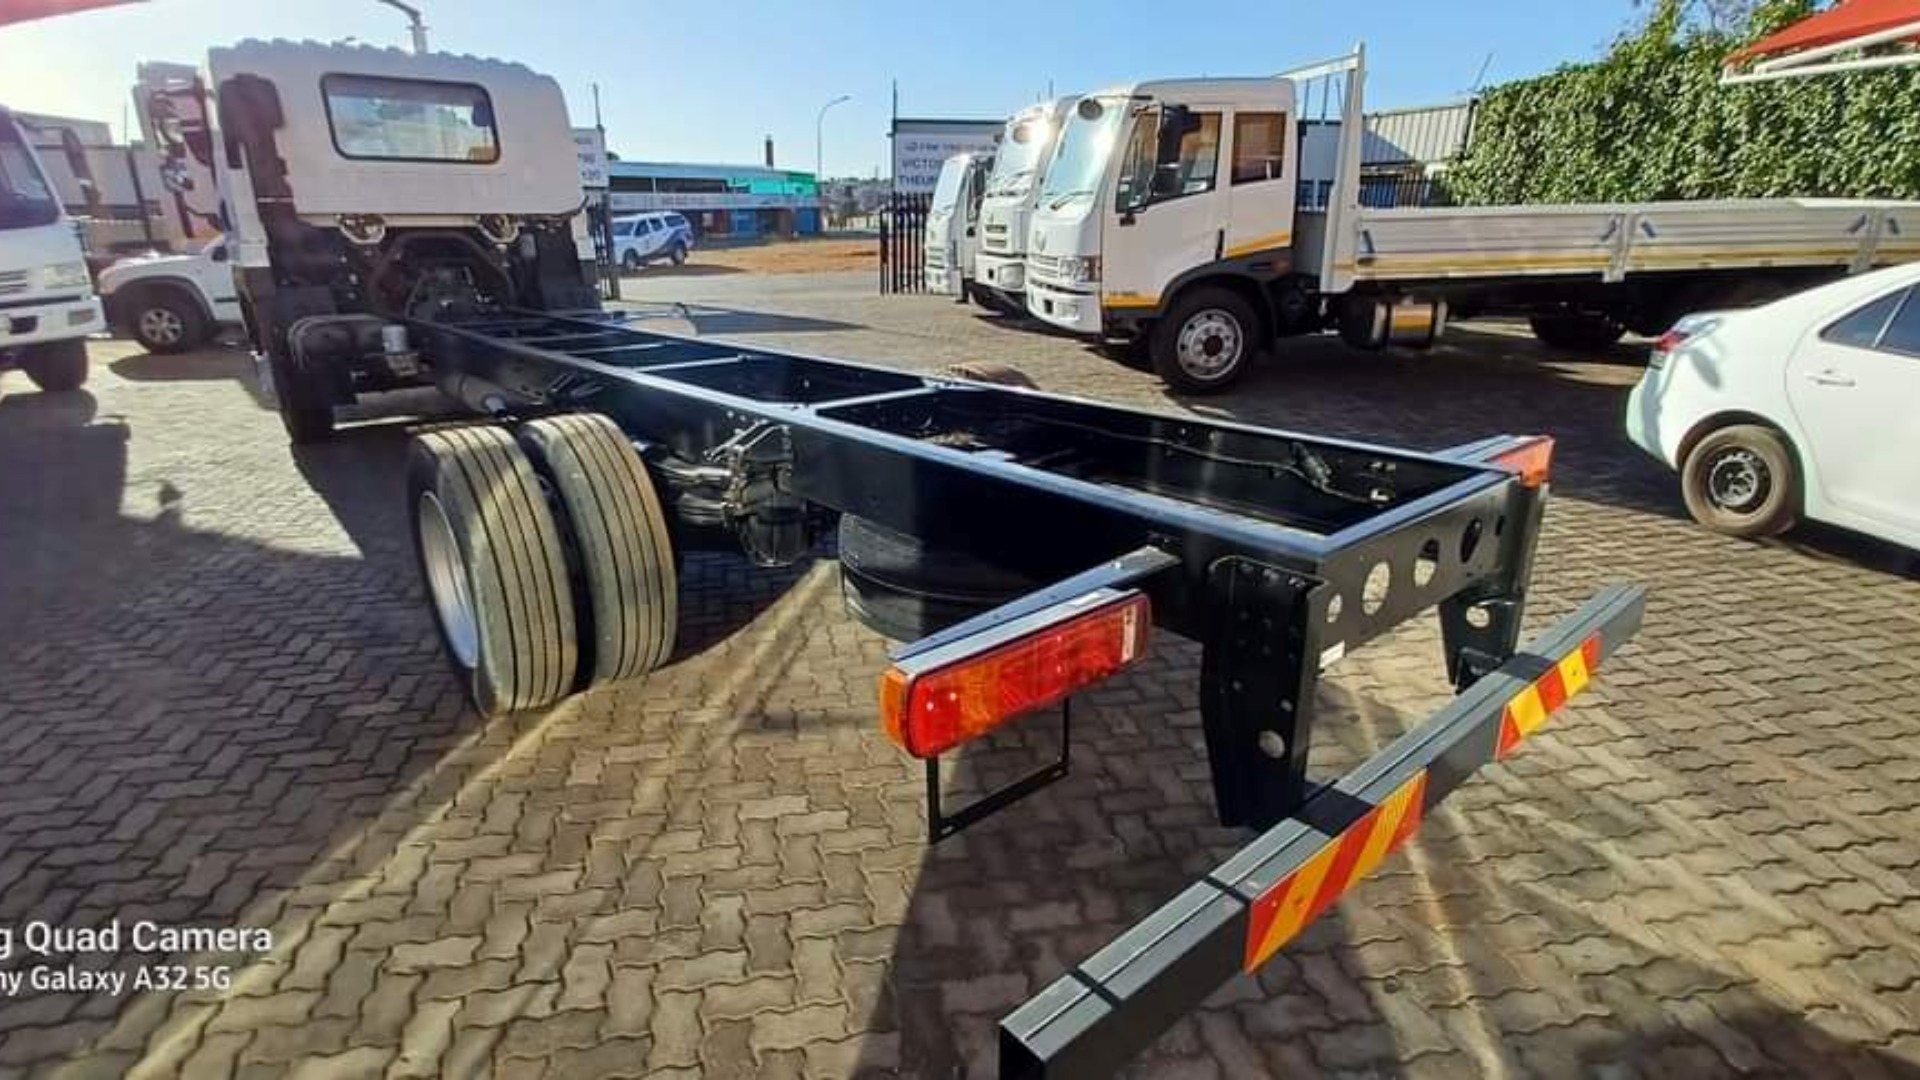 FAW Chassis cab trucks Brand new FAW JK6 15 220 Chassis Cab 2023 for sale by FAW Newlands   | Truck & Trailer Marketplace